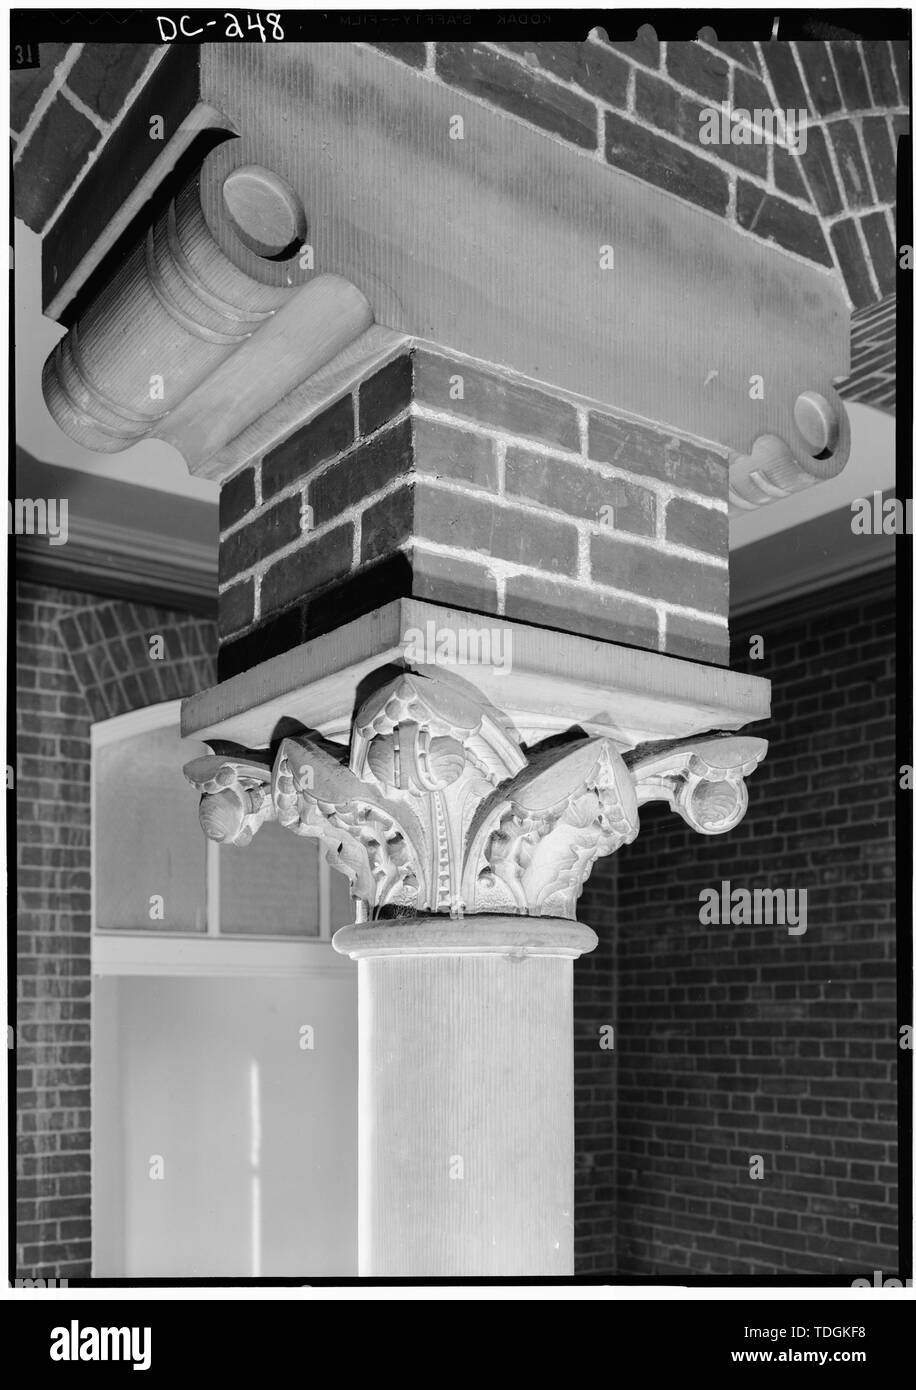 November 1969 COLUMN CAPITAL, WEST SIDE OF HALL OPPOSITE STAIR, THIRD FLOOR - Georgetown University, Healy Building, Thirty-seventh and O Streets, Northwest, Washington, District of Columbia, DC Stock Photo